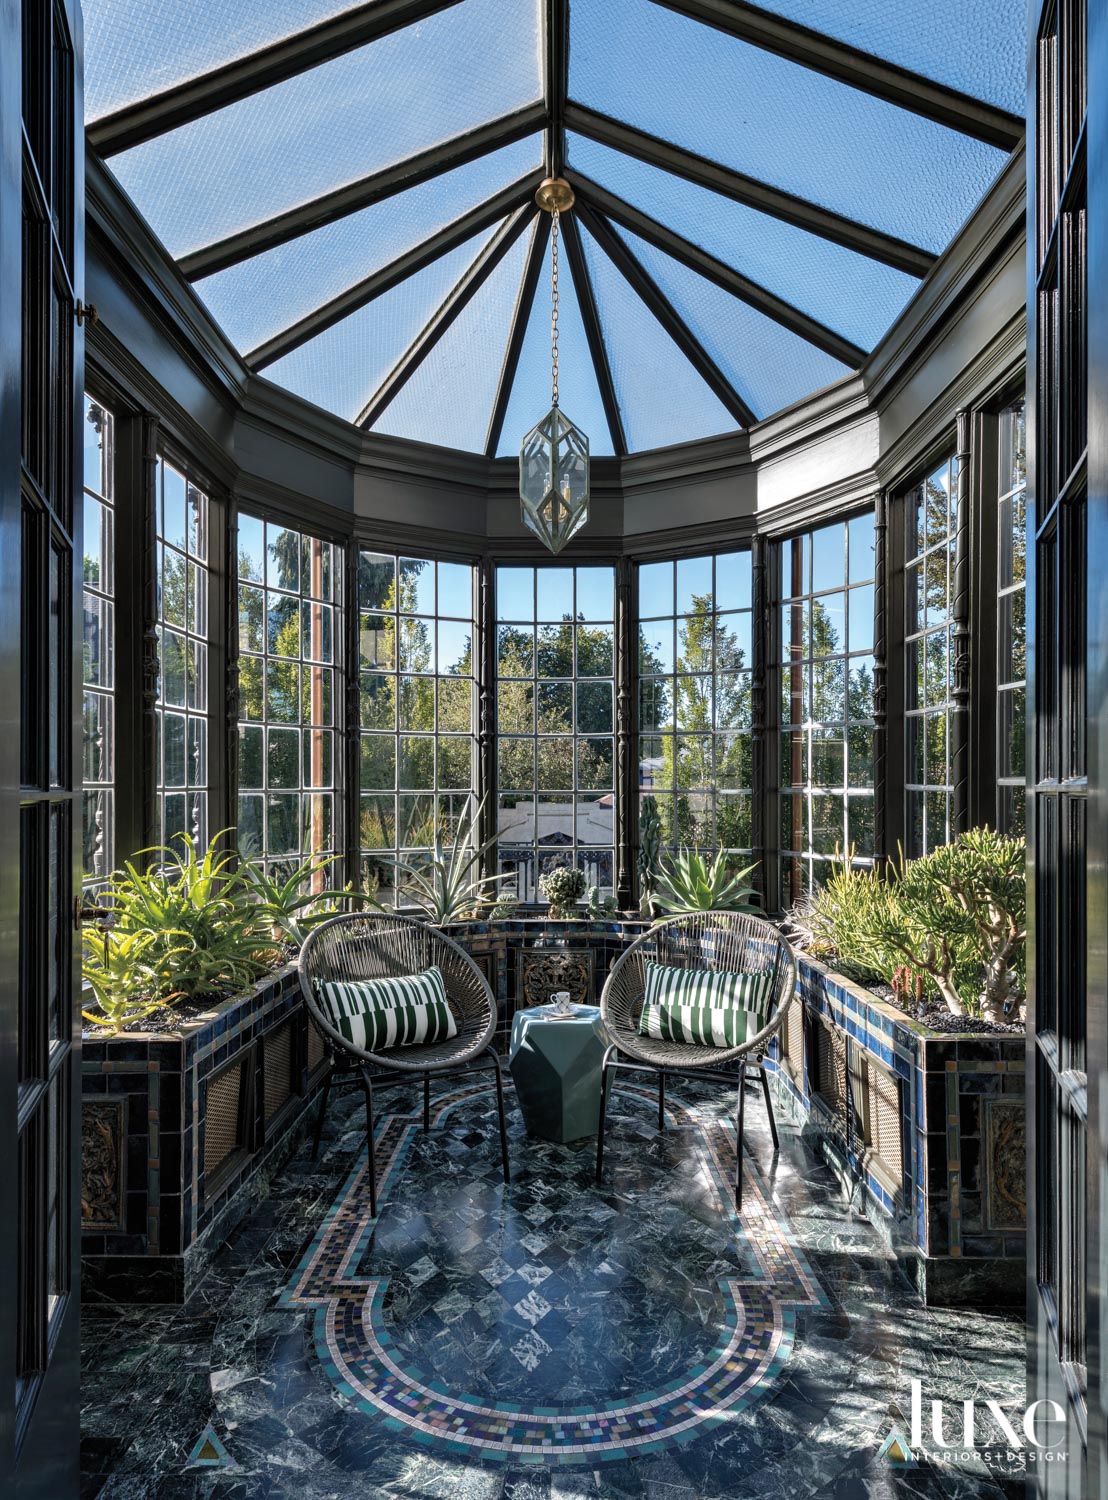 Orangerie with glass ceiling, pendant light and pair of chairs